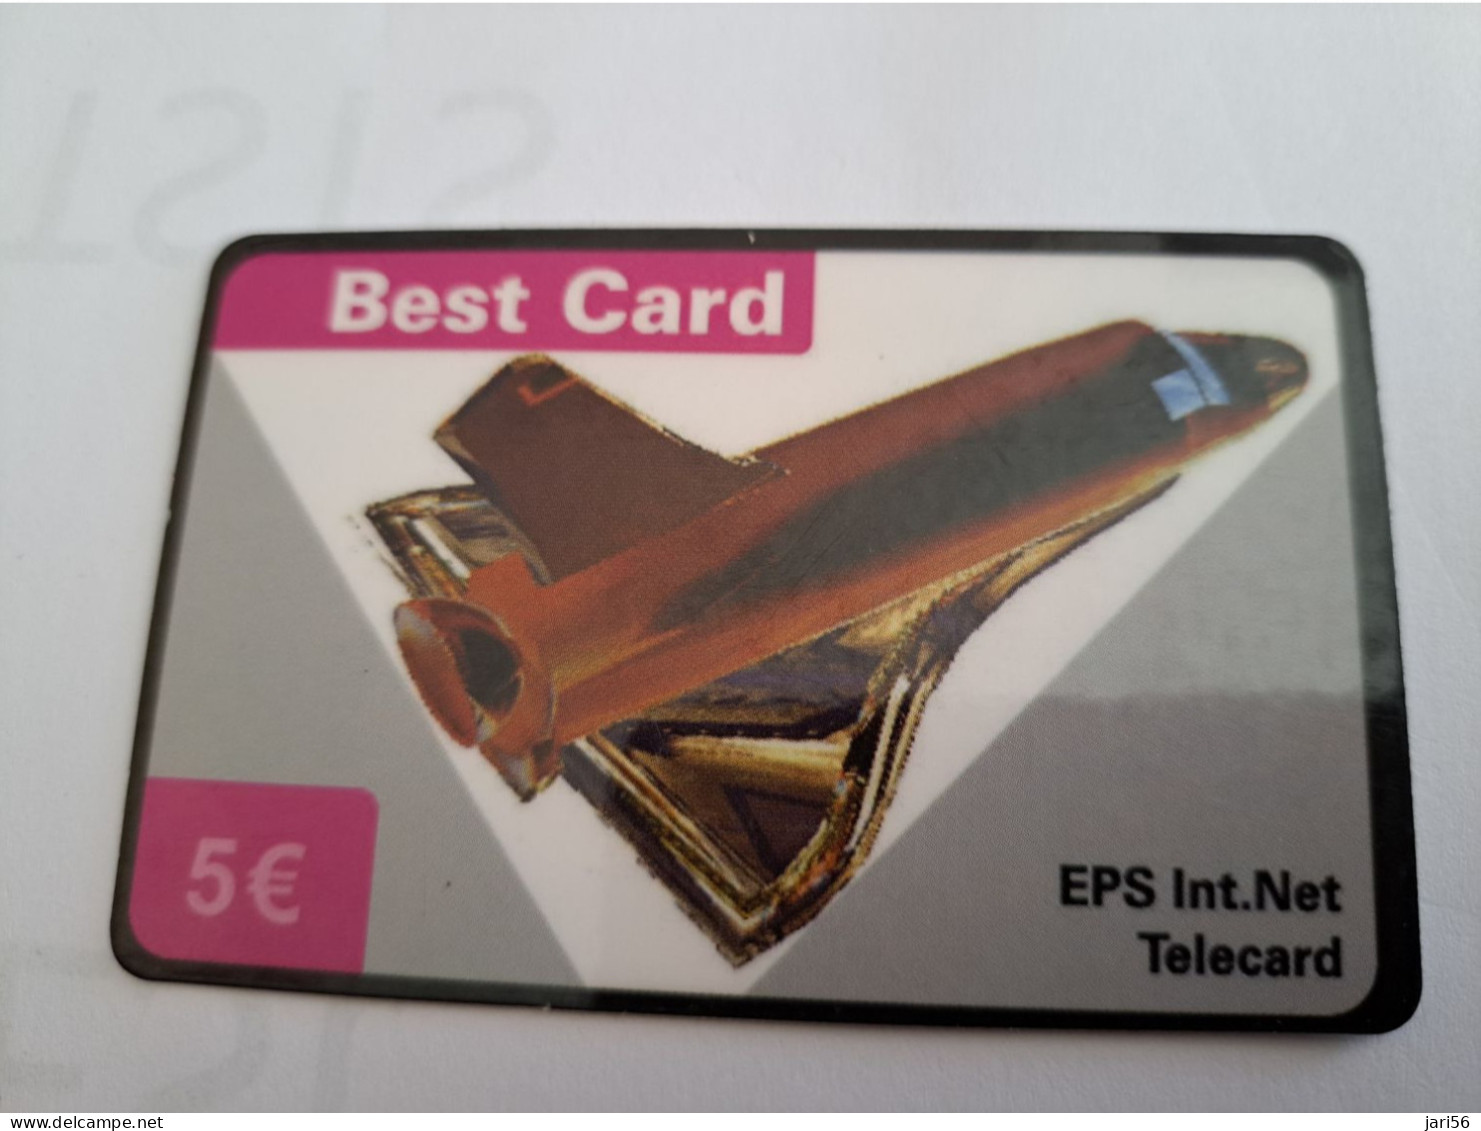 DUITSLAND/GERMANY  € 5,- / BEST CARD/ SPACE SHUTTLE   ON CARD        Fine Used  PREPAID  **16533** - GSM, Cartes Prepayées & Recharges